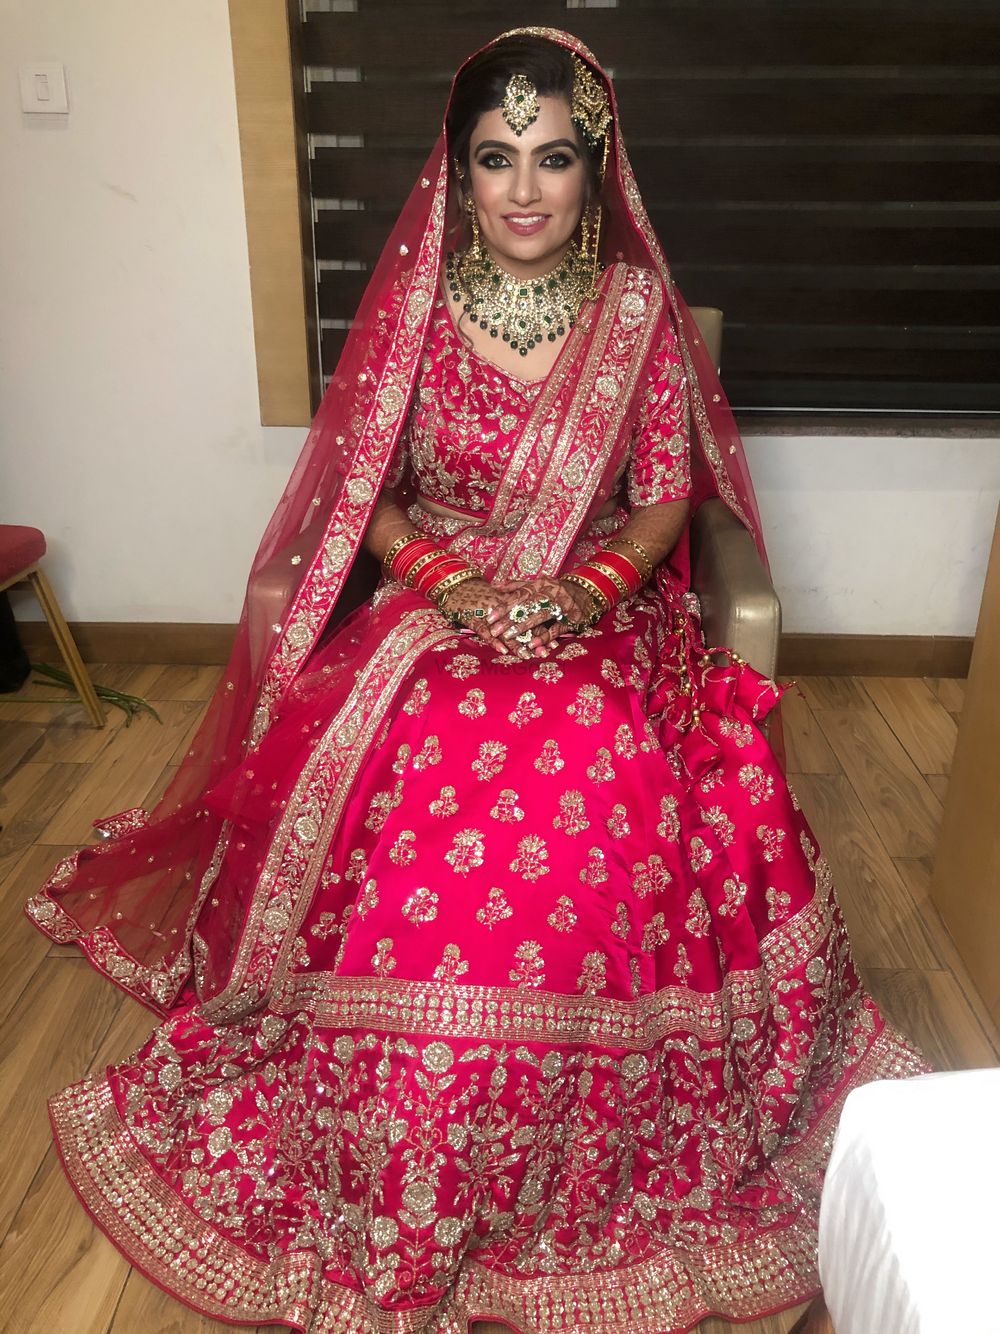 Photo From Khushboo’s Wedding & Engagement Look  - By Makeup by Mansi Lakhwani